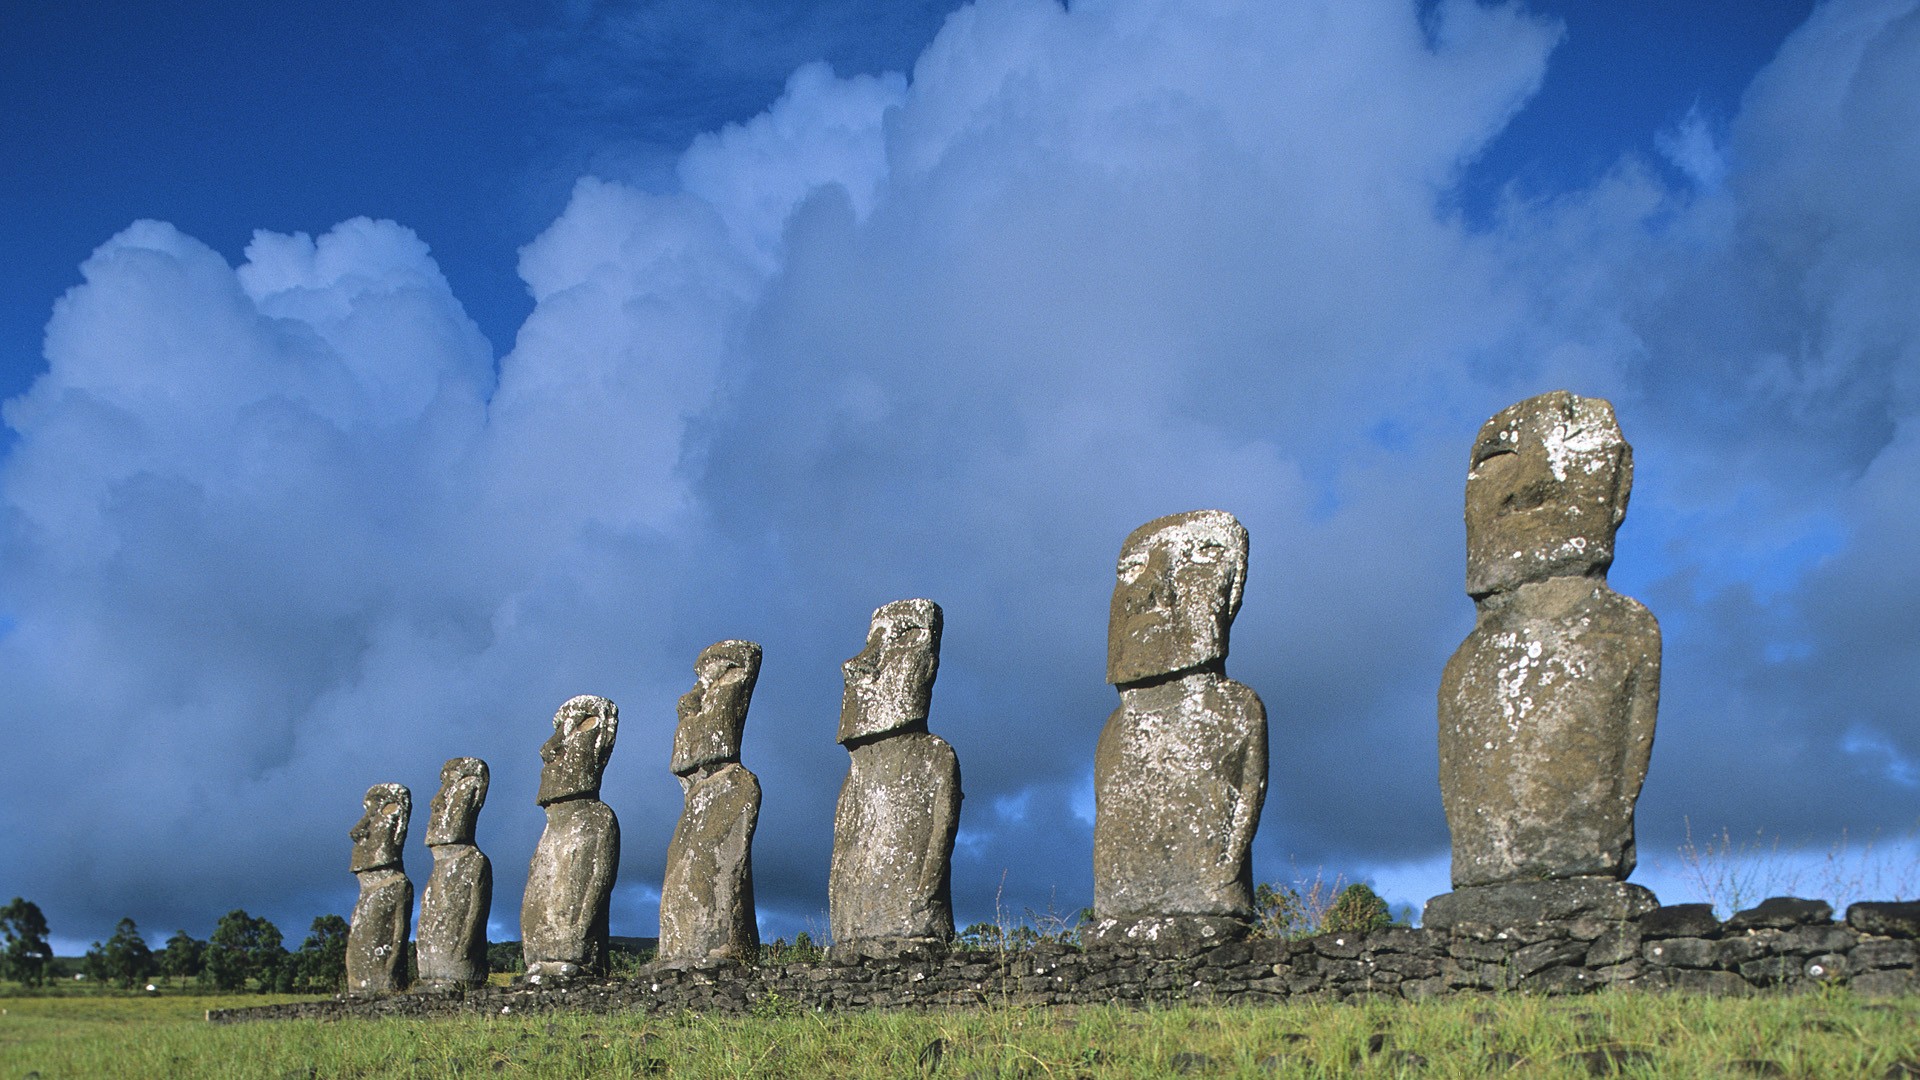  Wide HD Cool Easter Island Pictures Wallpaper FLGX HD 51659 KB 1920x1080